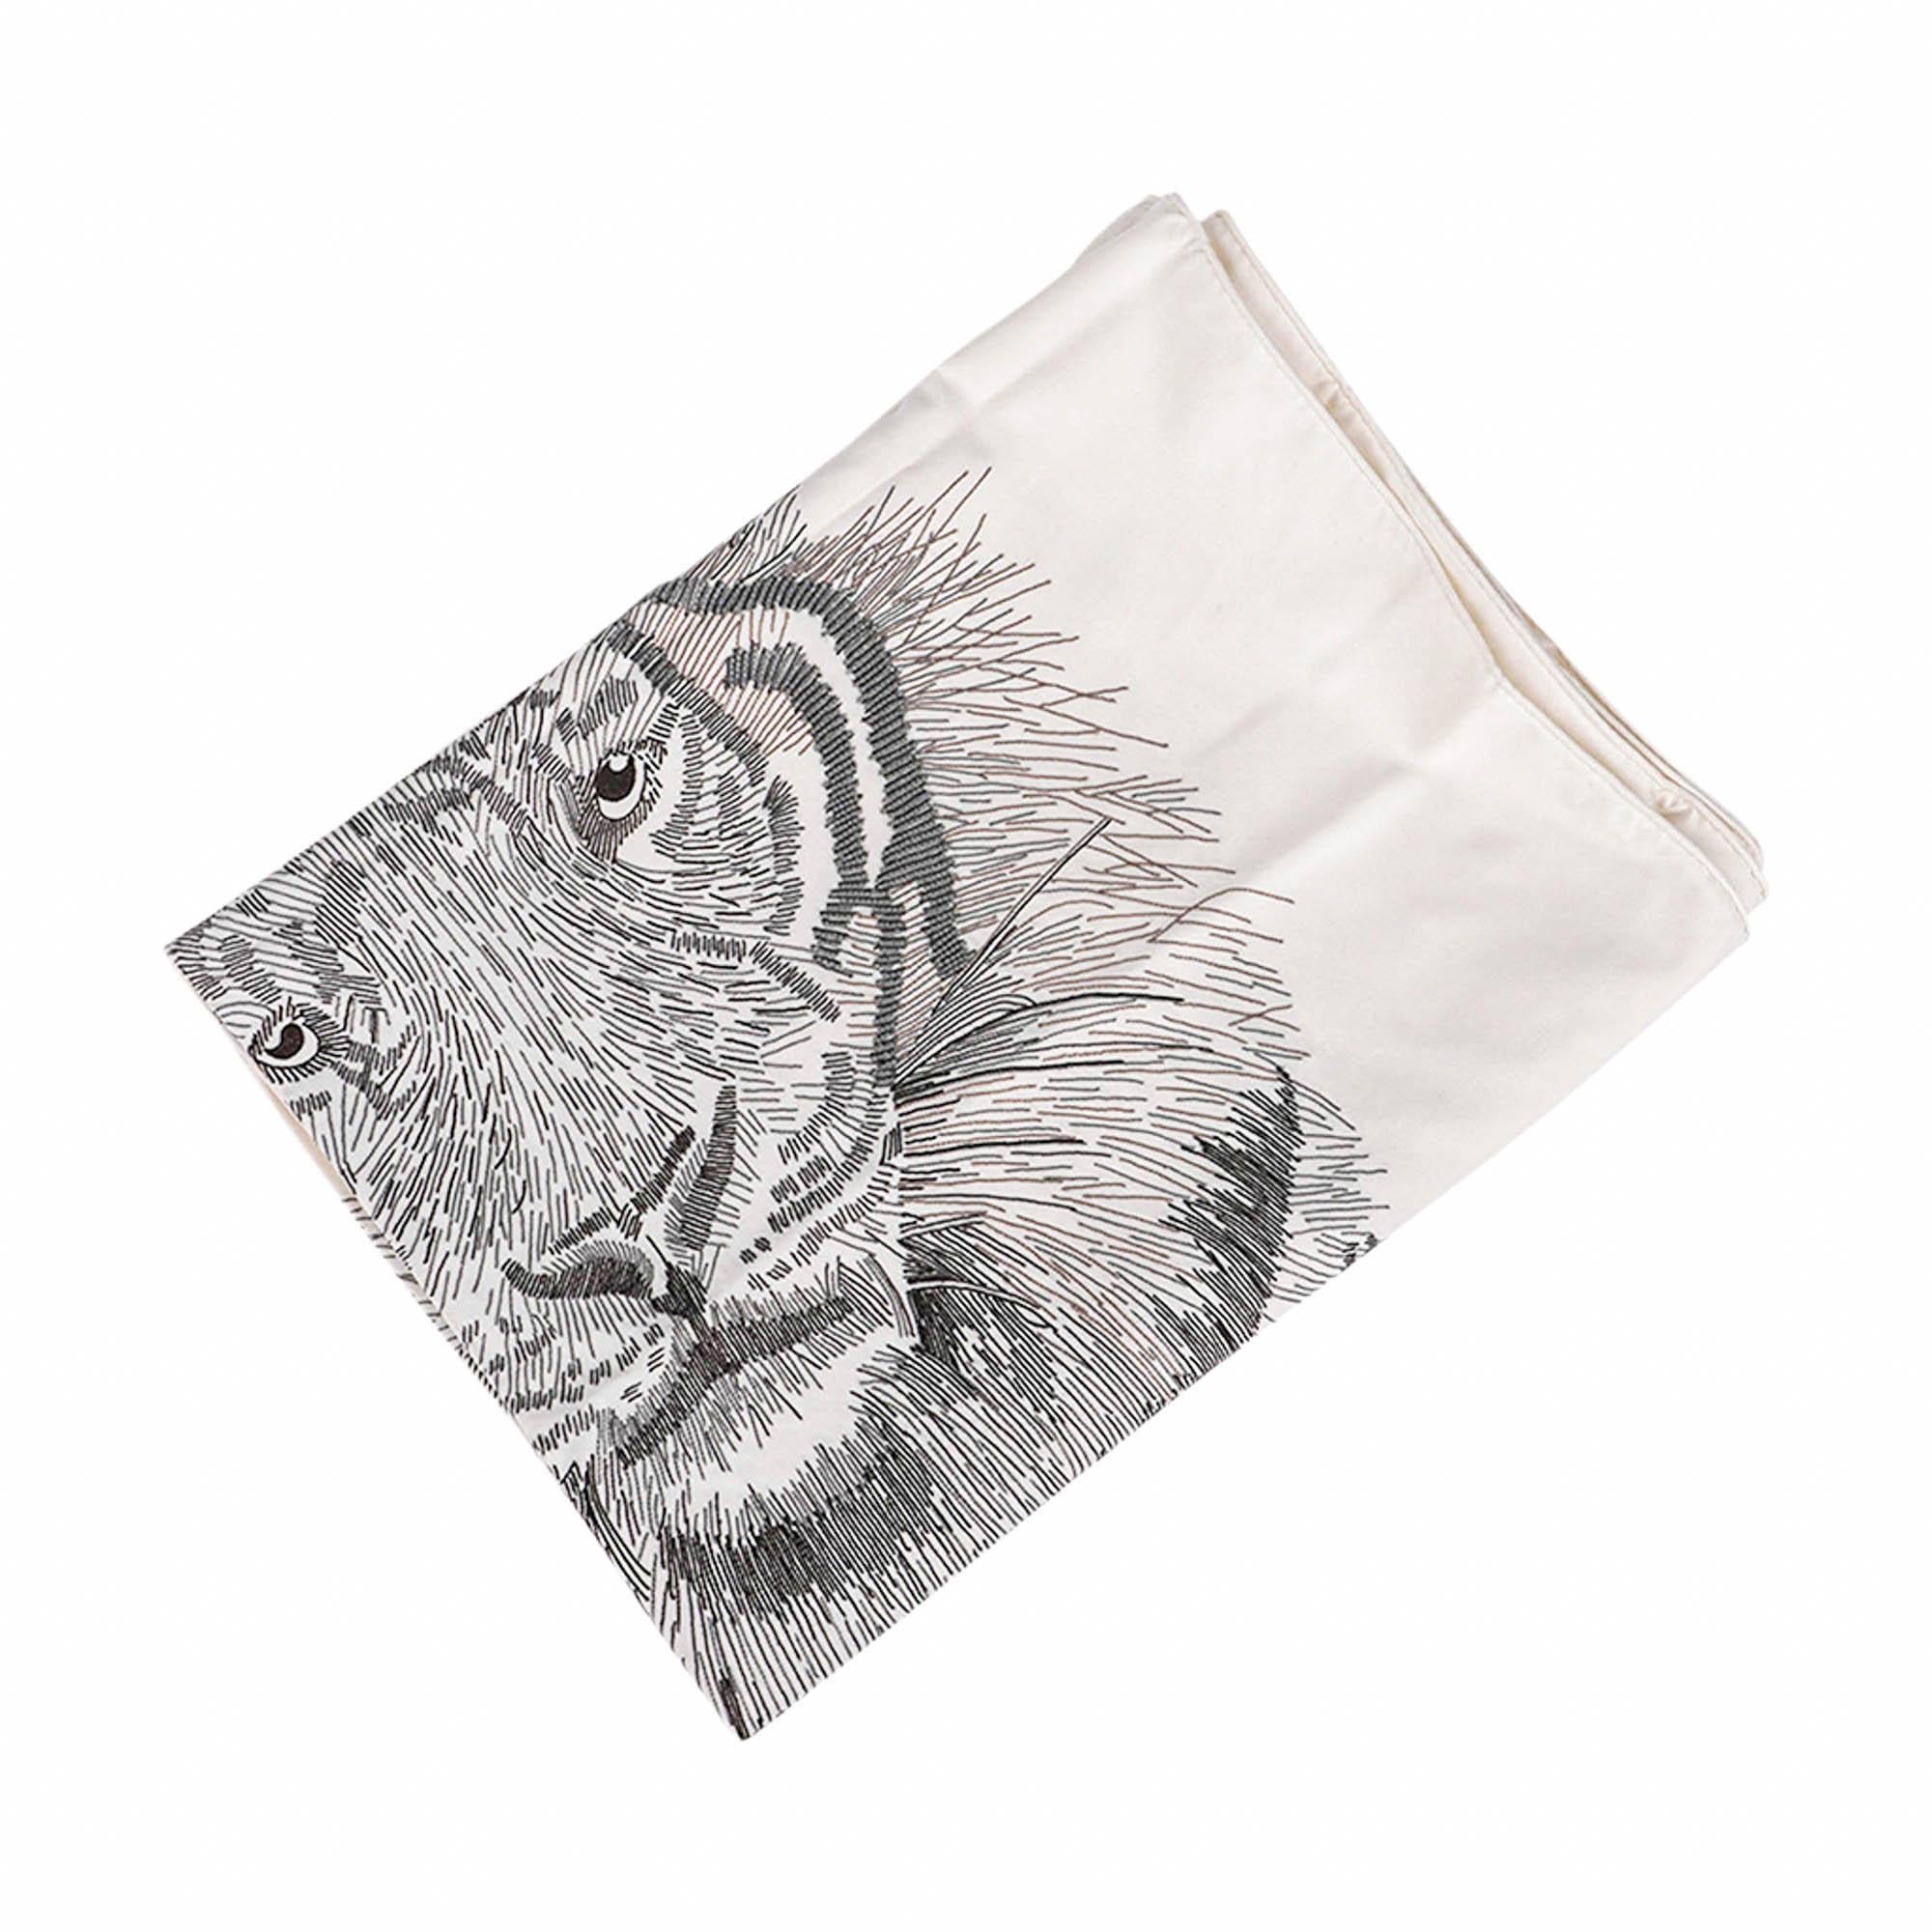 Mightychic offers a limited edition Hermes Tigre Royal stole adorned with exquisite embroidery and beads.
Meticulously crafted with over 70 hours of hand embroidery, this splendid scarf is presented in luxurious cream silk.
Designed by Christiane